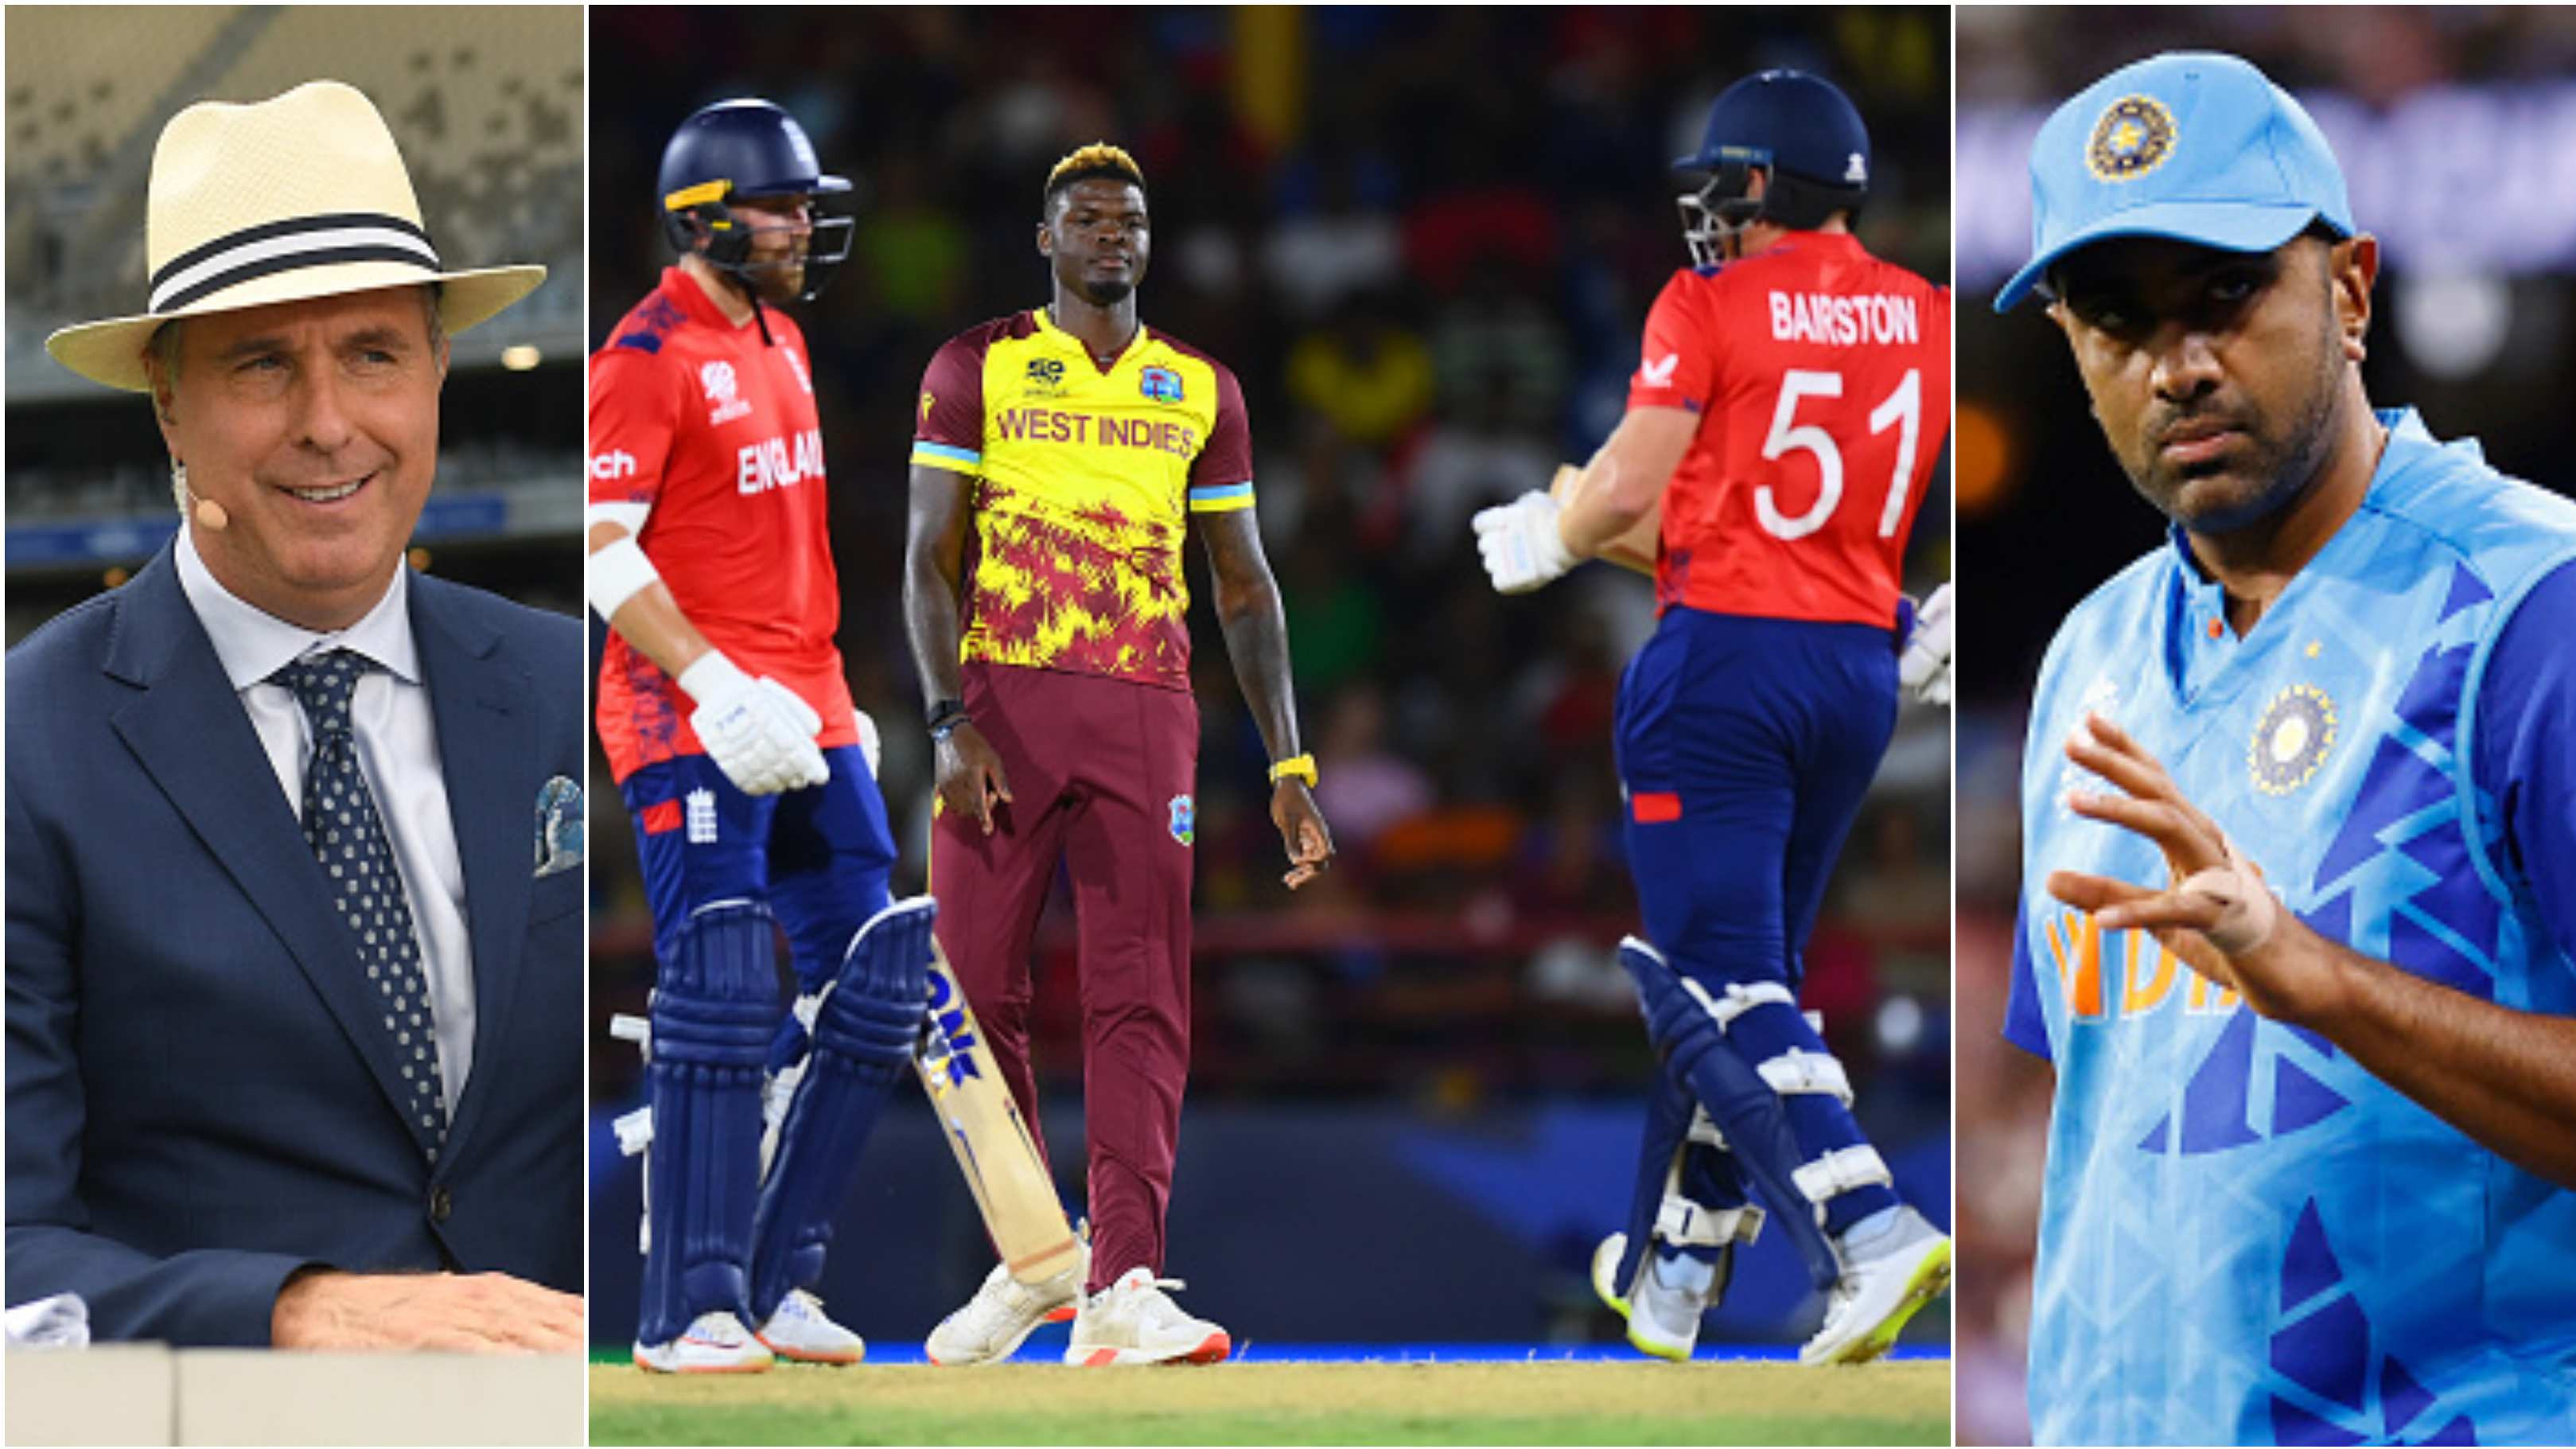 Cricket fraternity reacts as Phil Salt's blitz guides England to comfortable win over West Indies in Super 8s